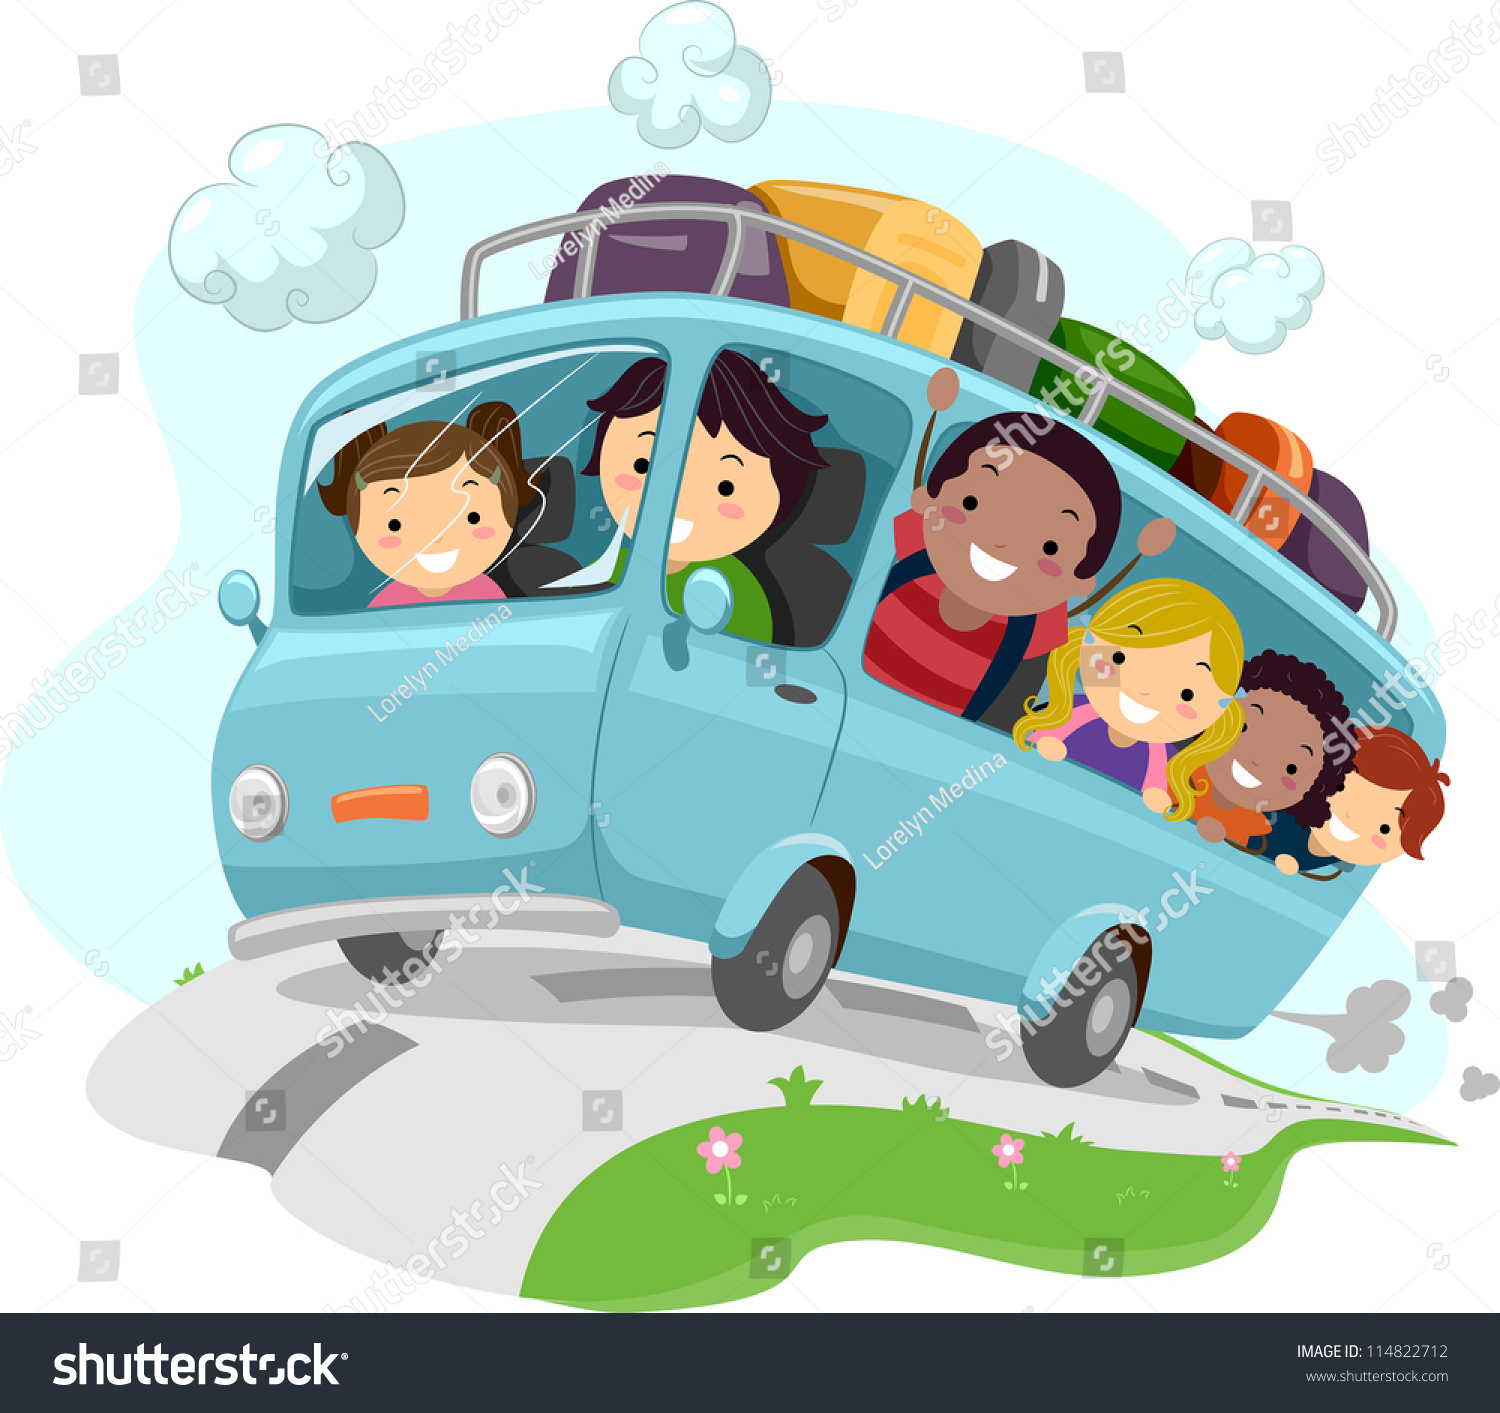  collection of high. Bus clipart picnic